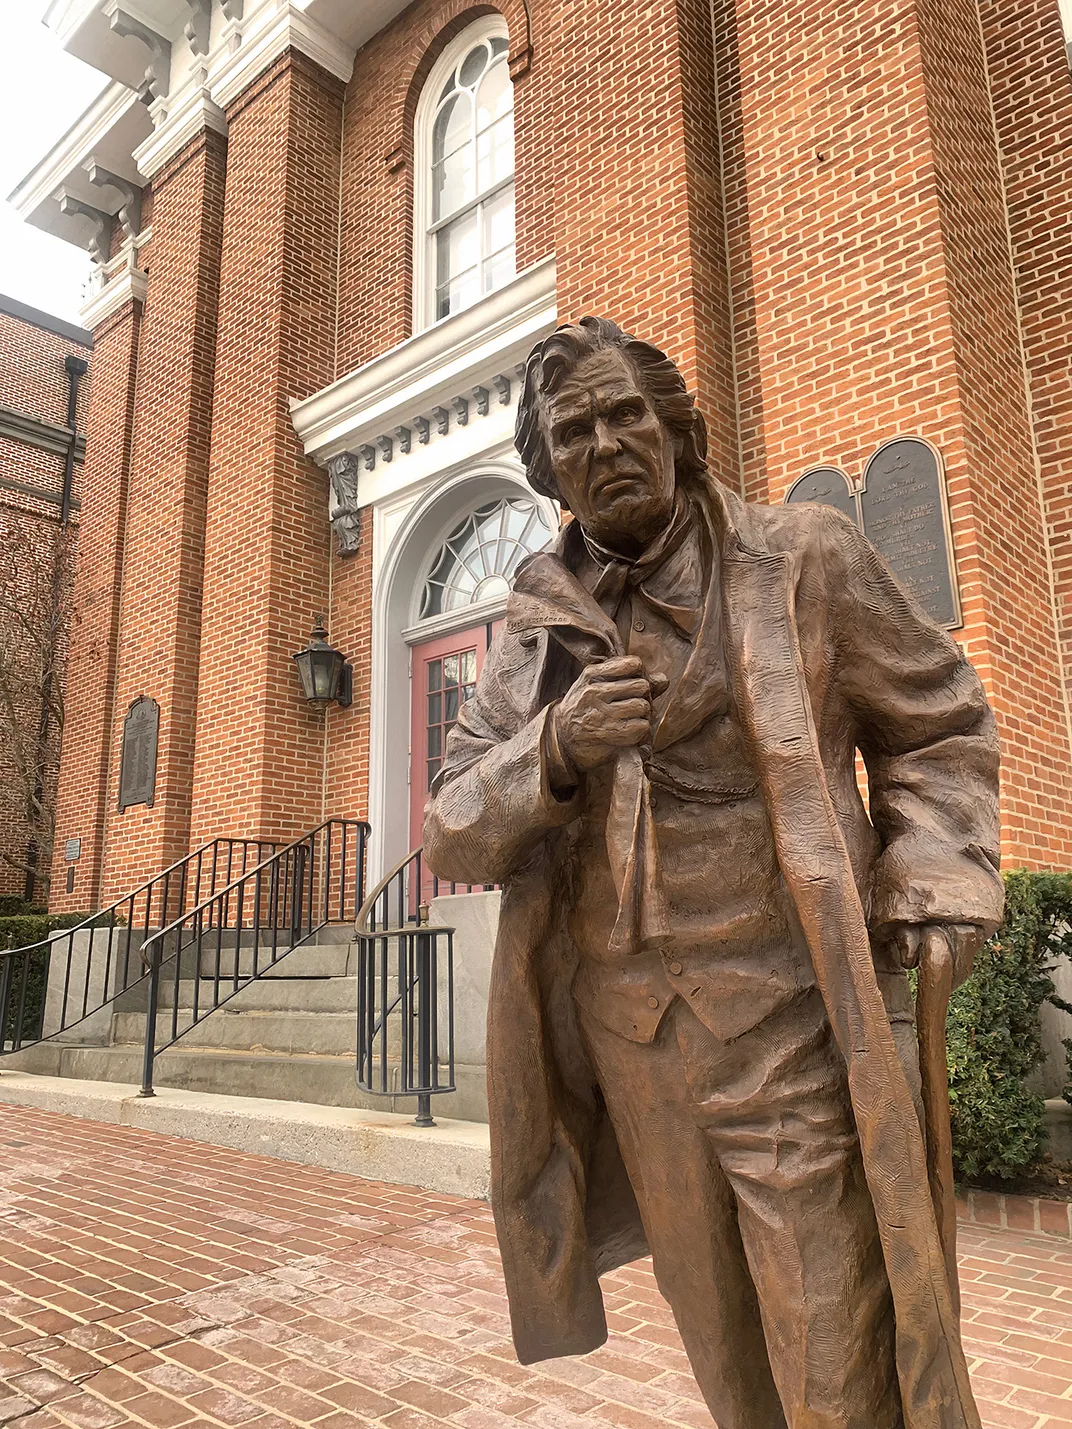 a statue of man with a cain in long overcoat stands in front of a courthouse